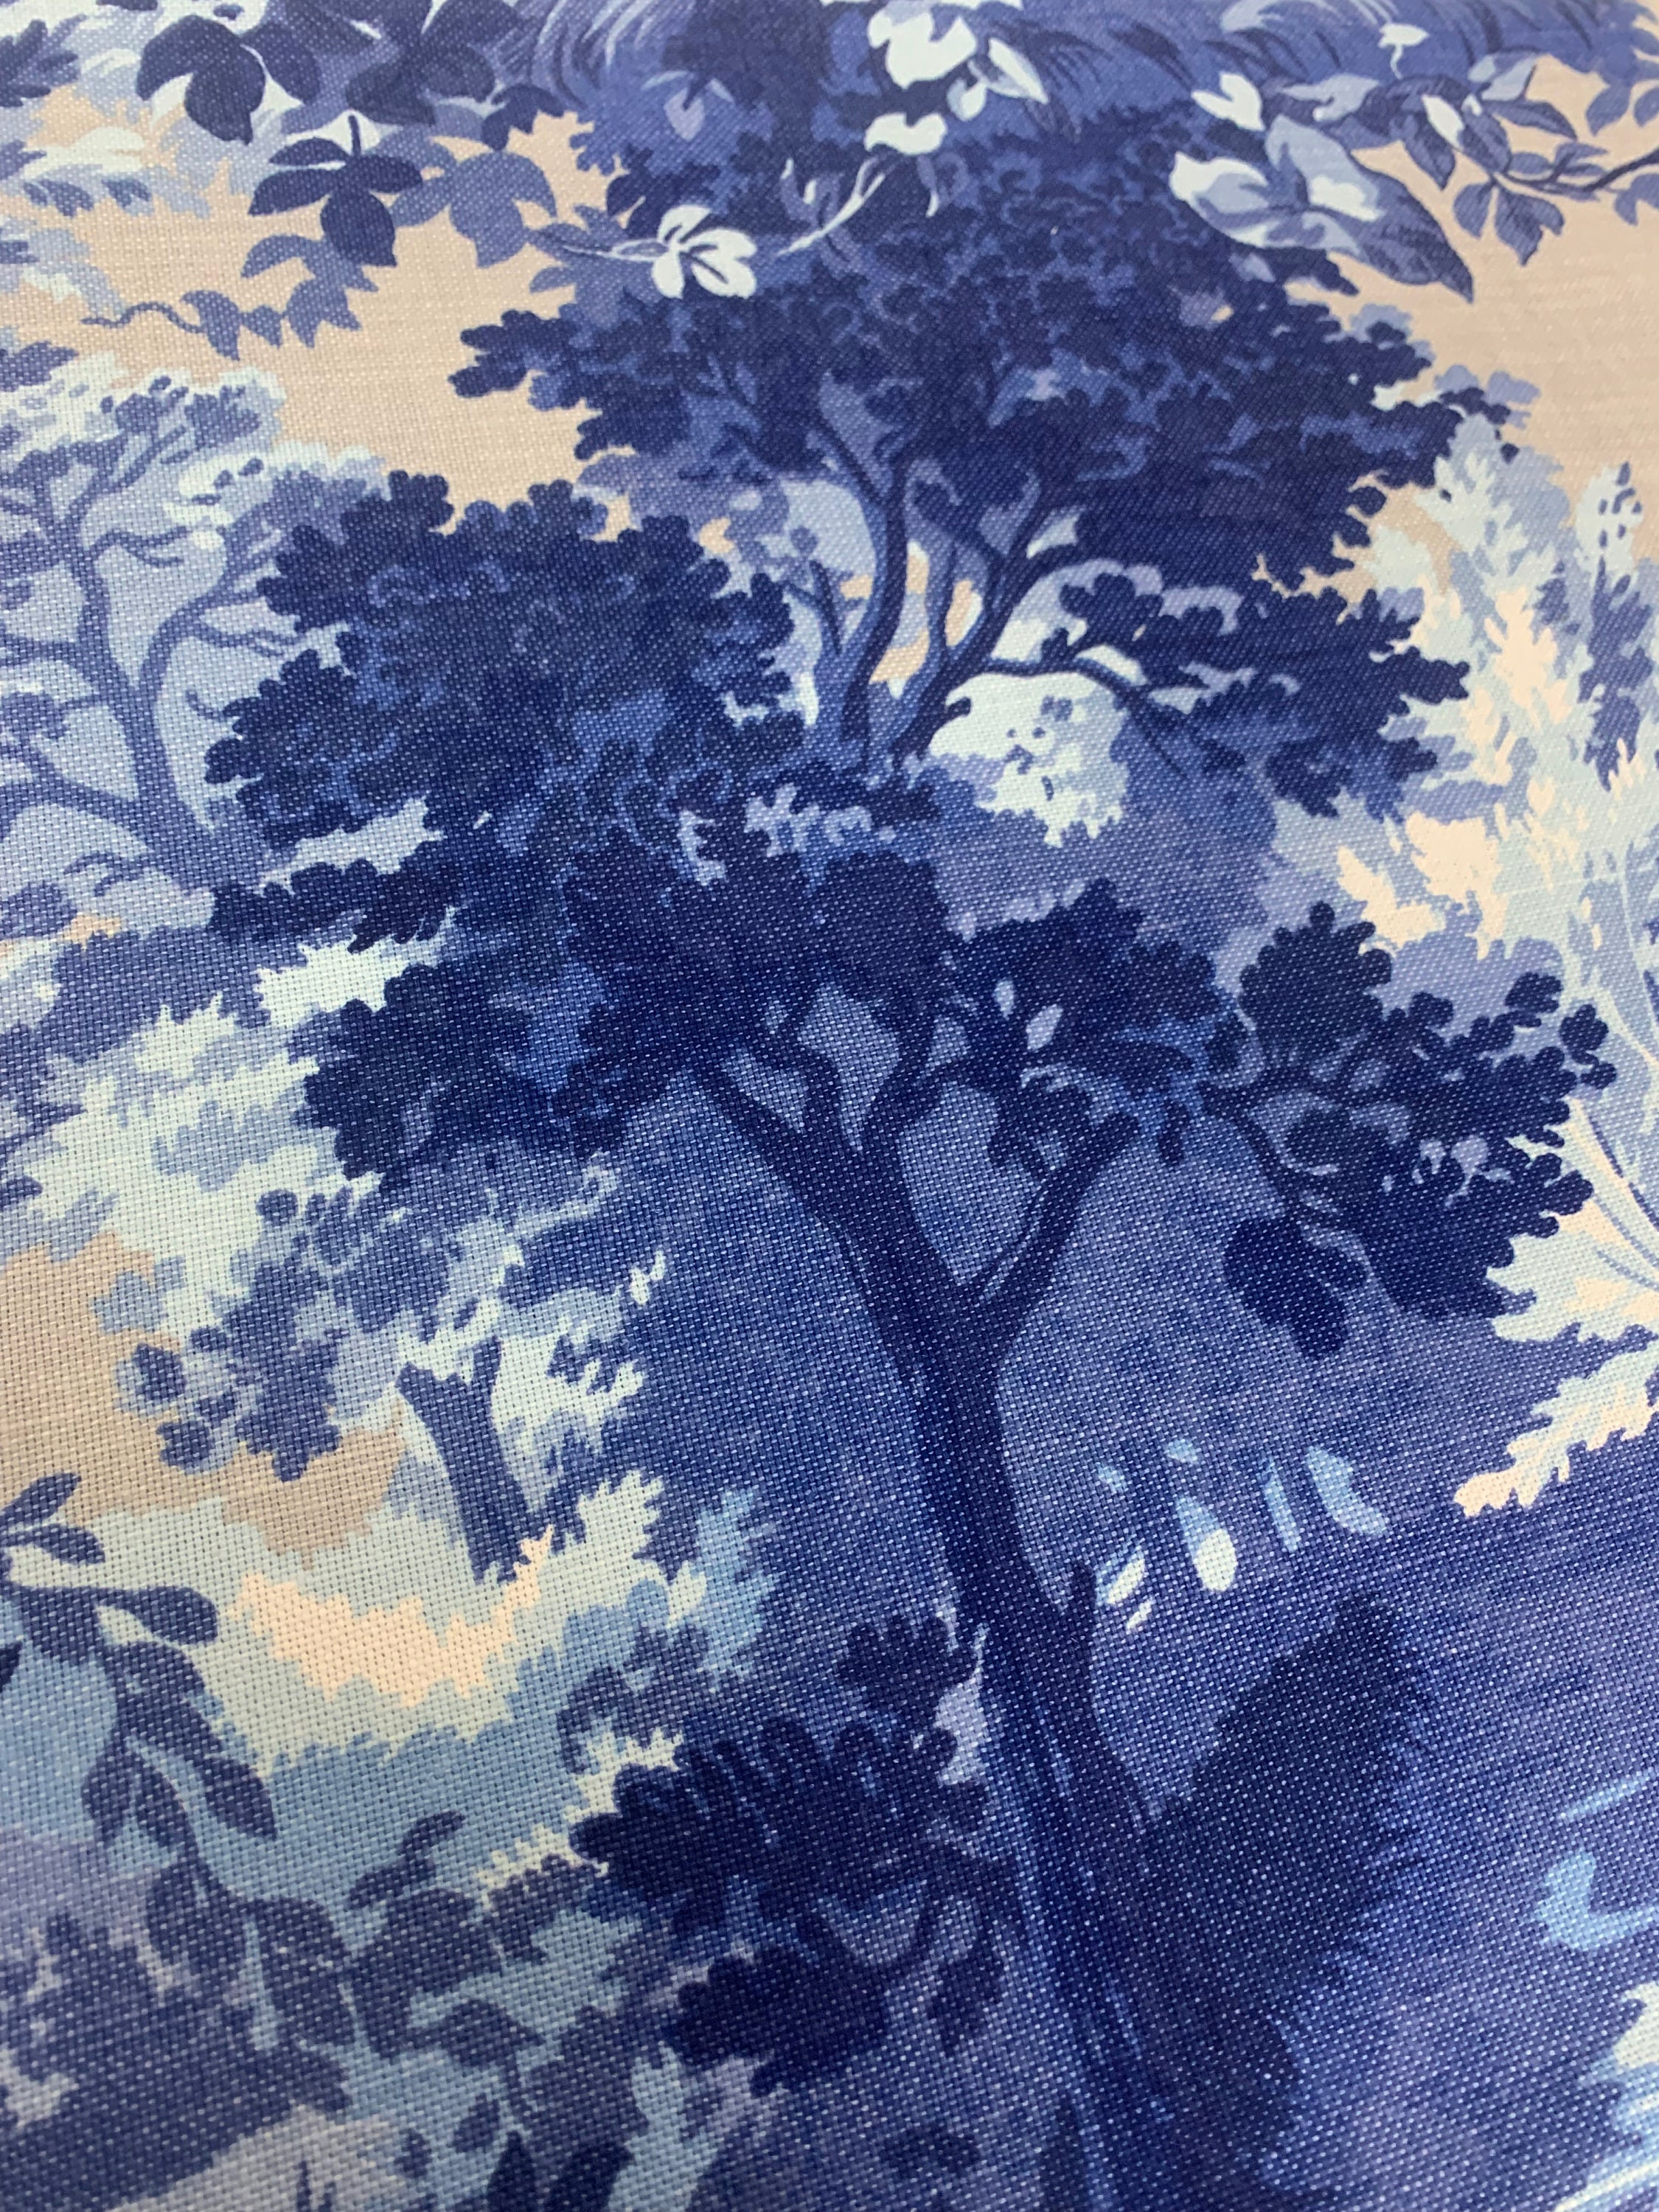 Thibaut Lincoln Toile Fabric - Blue and Flax